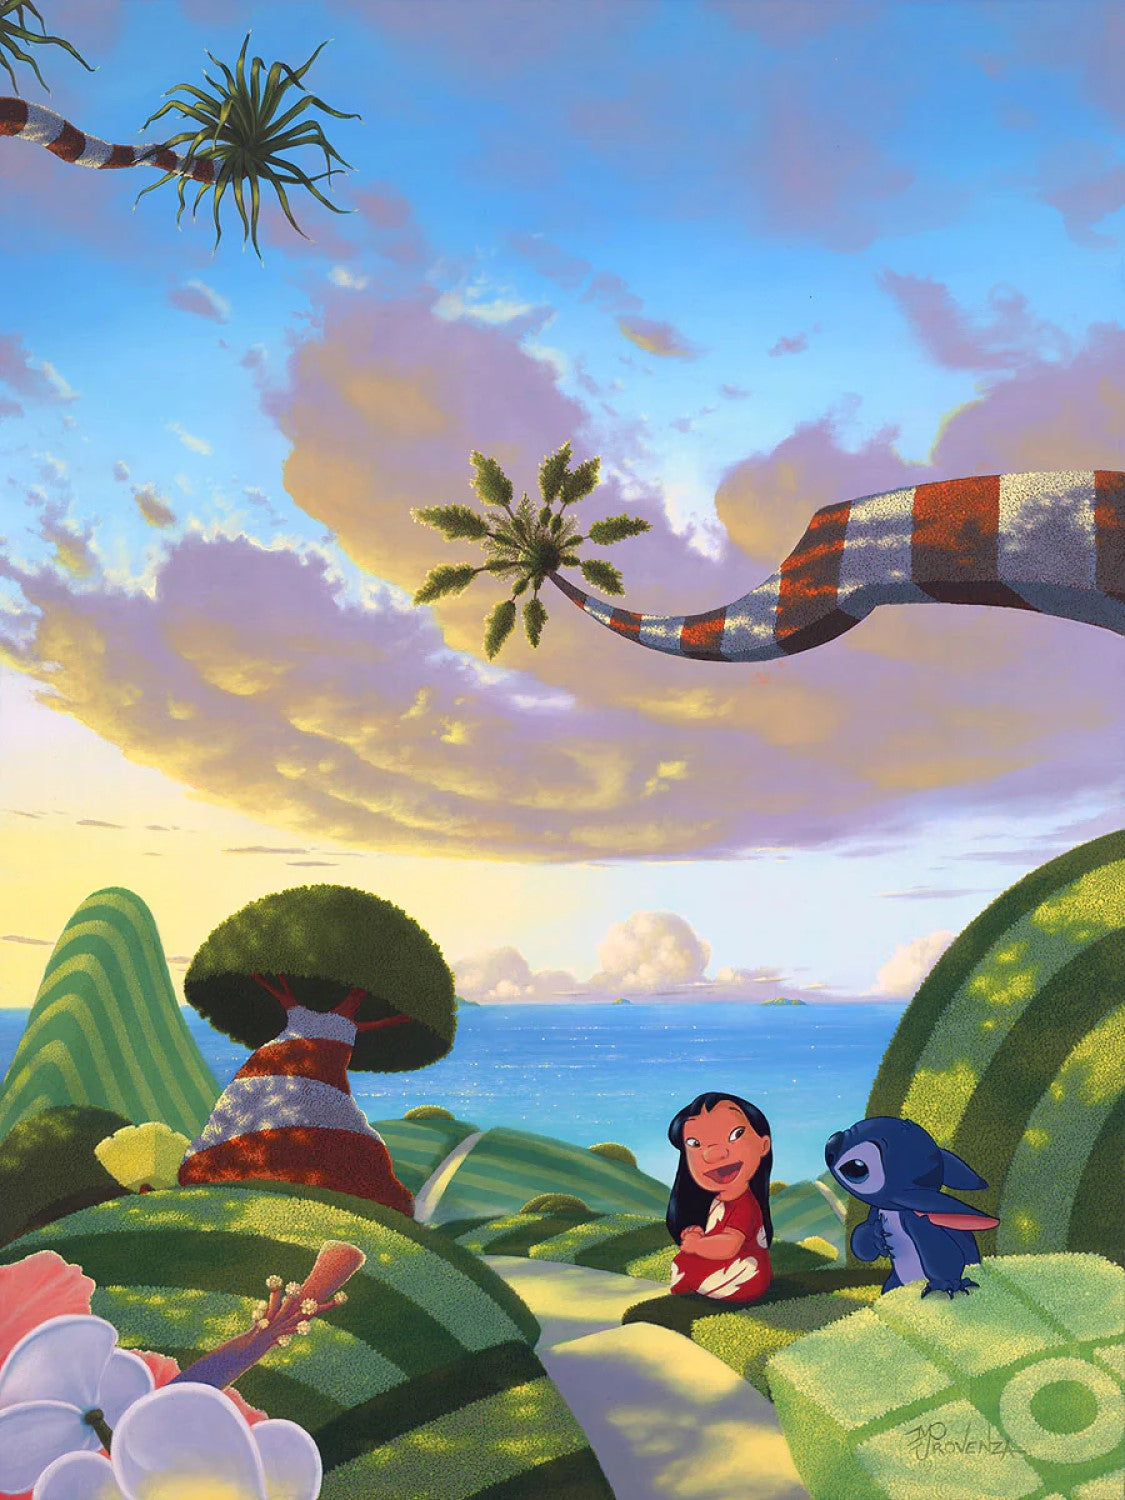 A Tropical Idea by Michael Provenza inspired by Lilo and Stitch